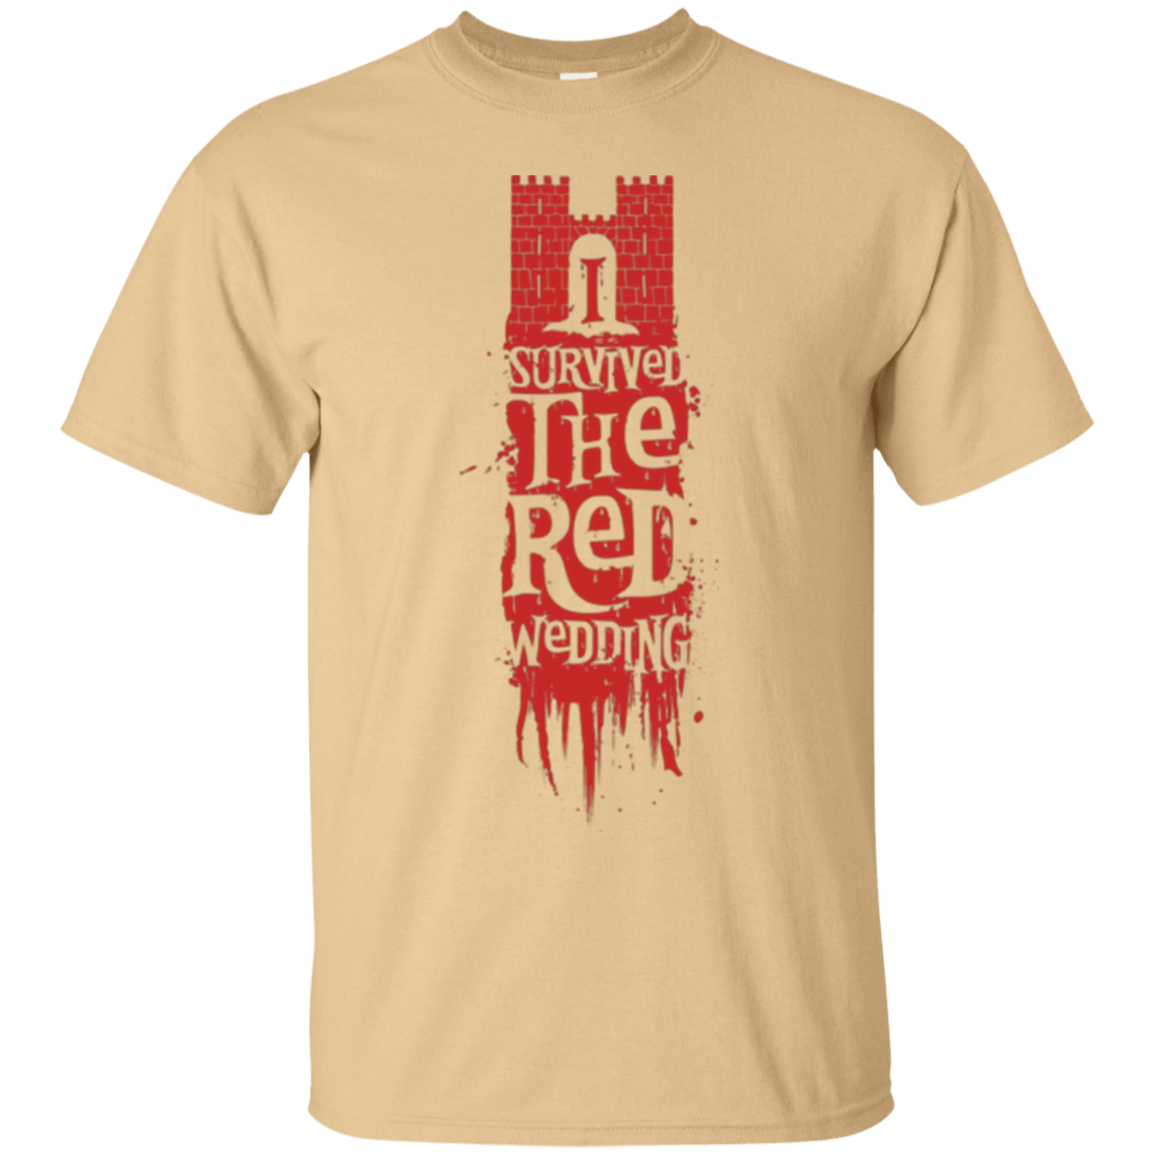 T-Shirts Vegas Gold / Small I Survived the Red Wedding T-Shirt